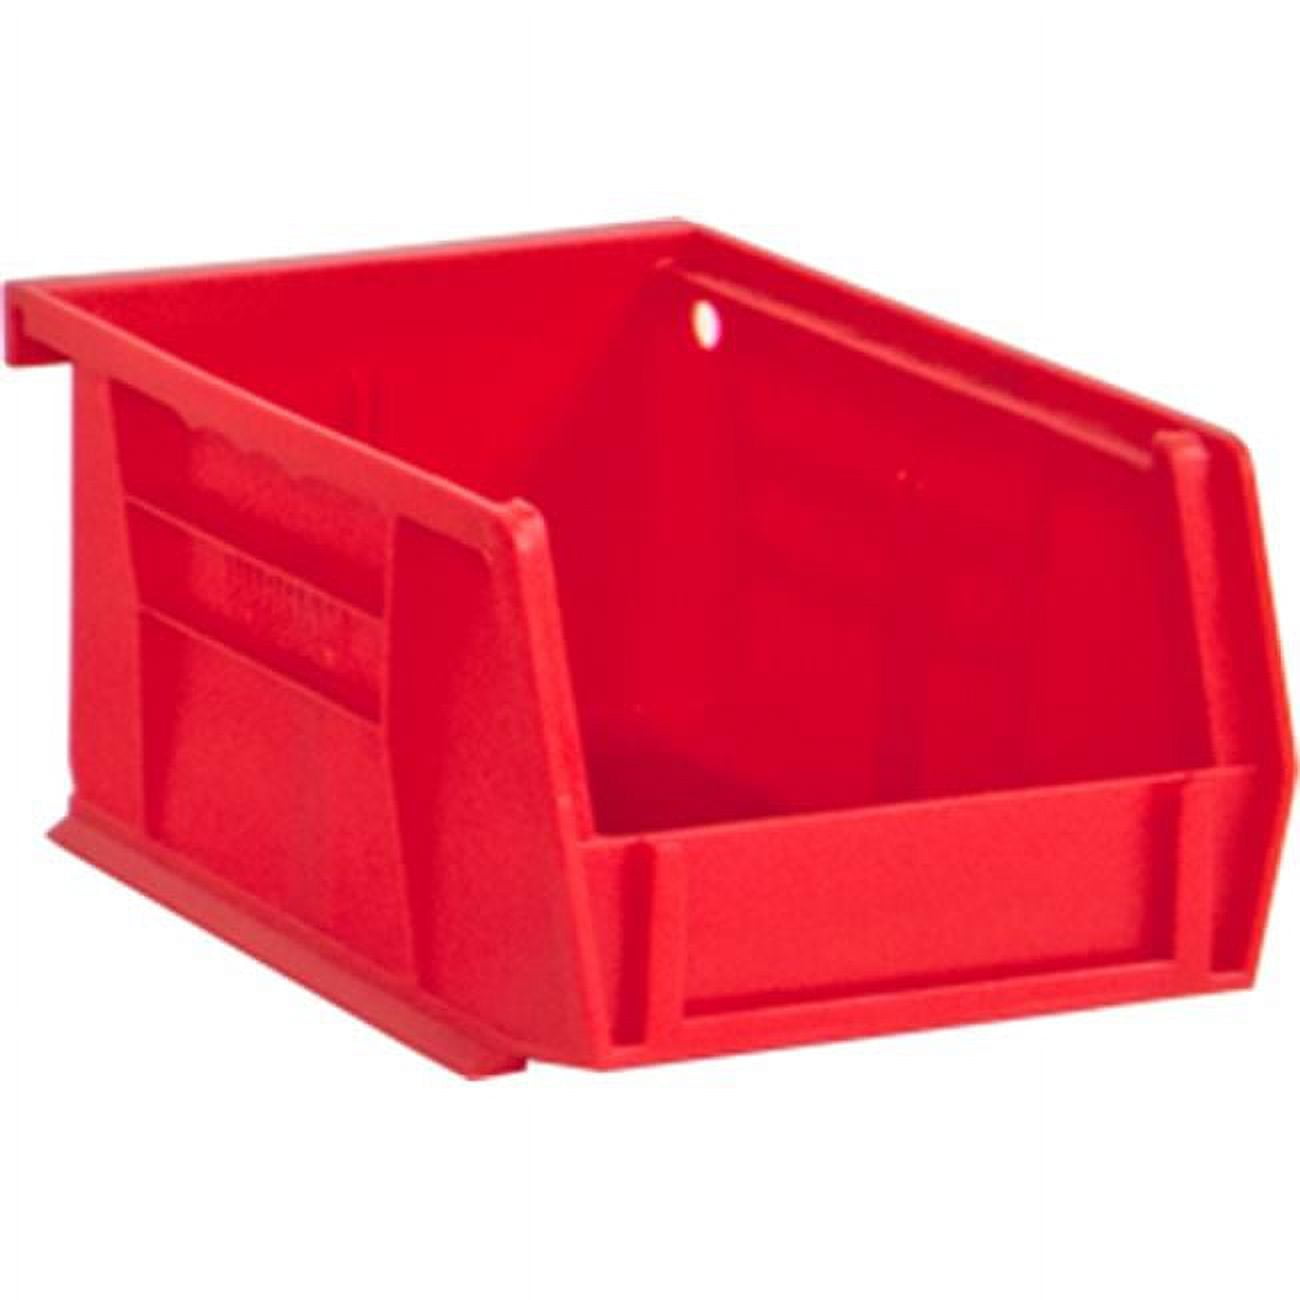 Picture of Durham PB30210-17 3 in. Plastic Bin, Red - 10 lbs